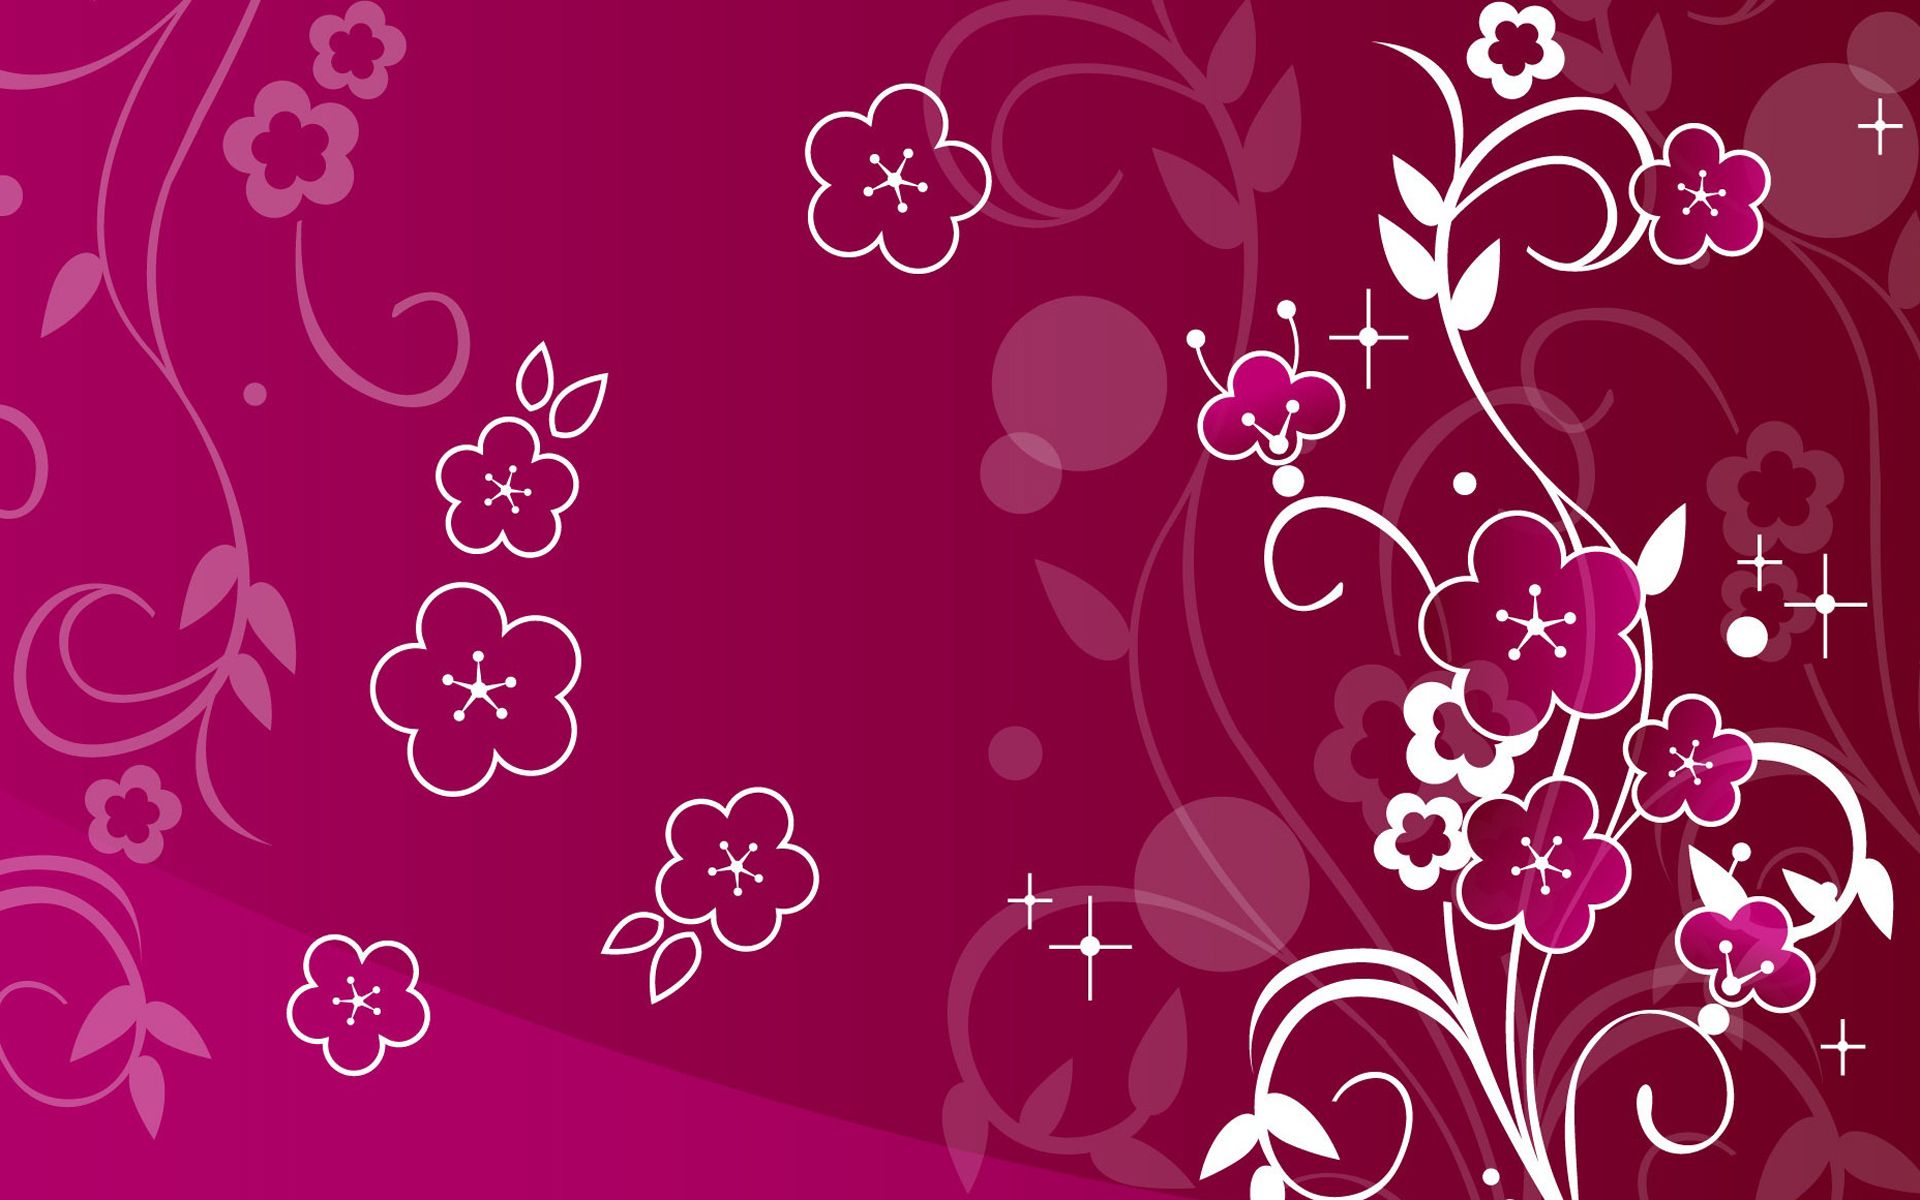 flower backgrounds amusingfun com pictures and graphics for